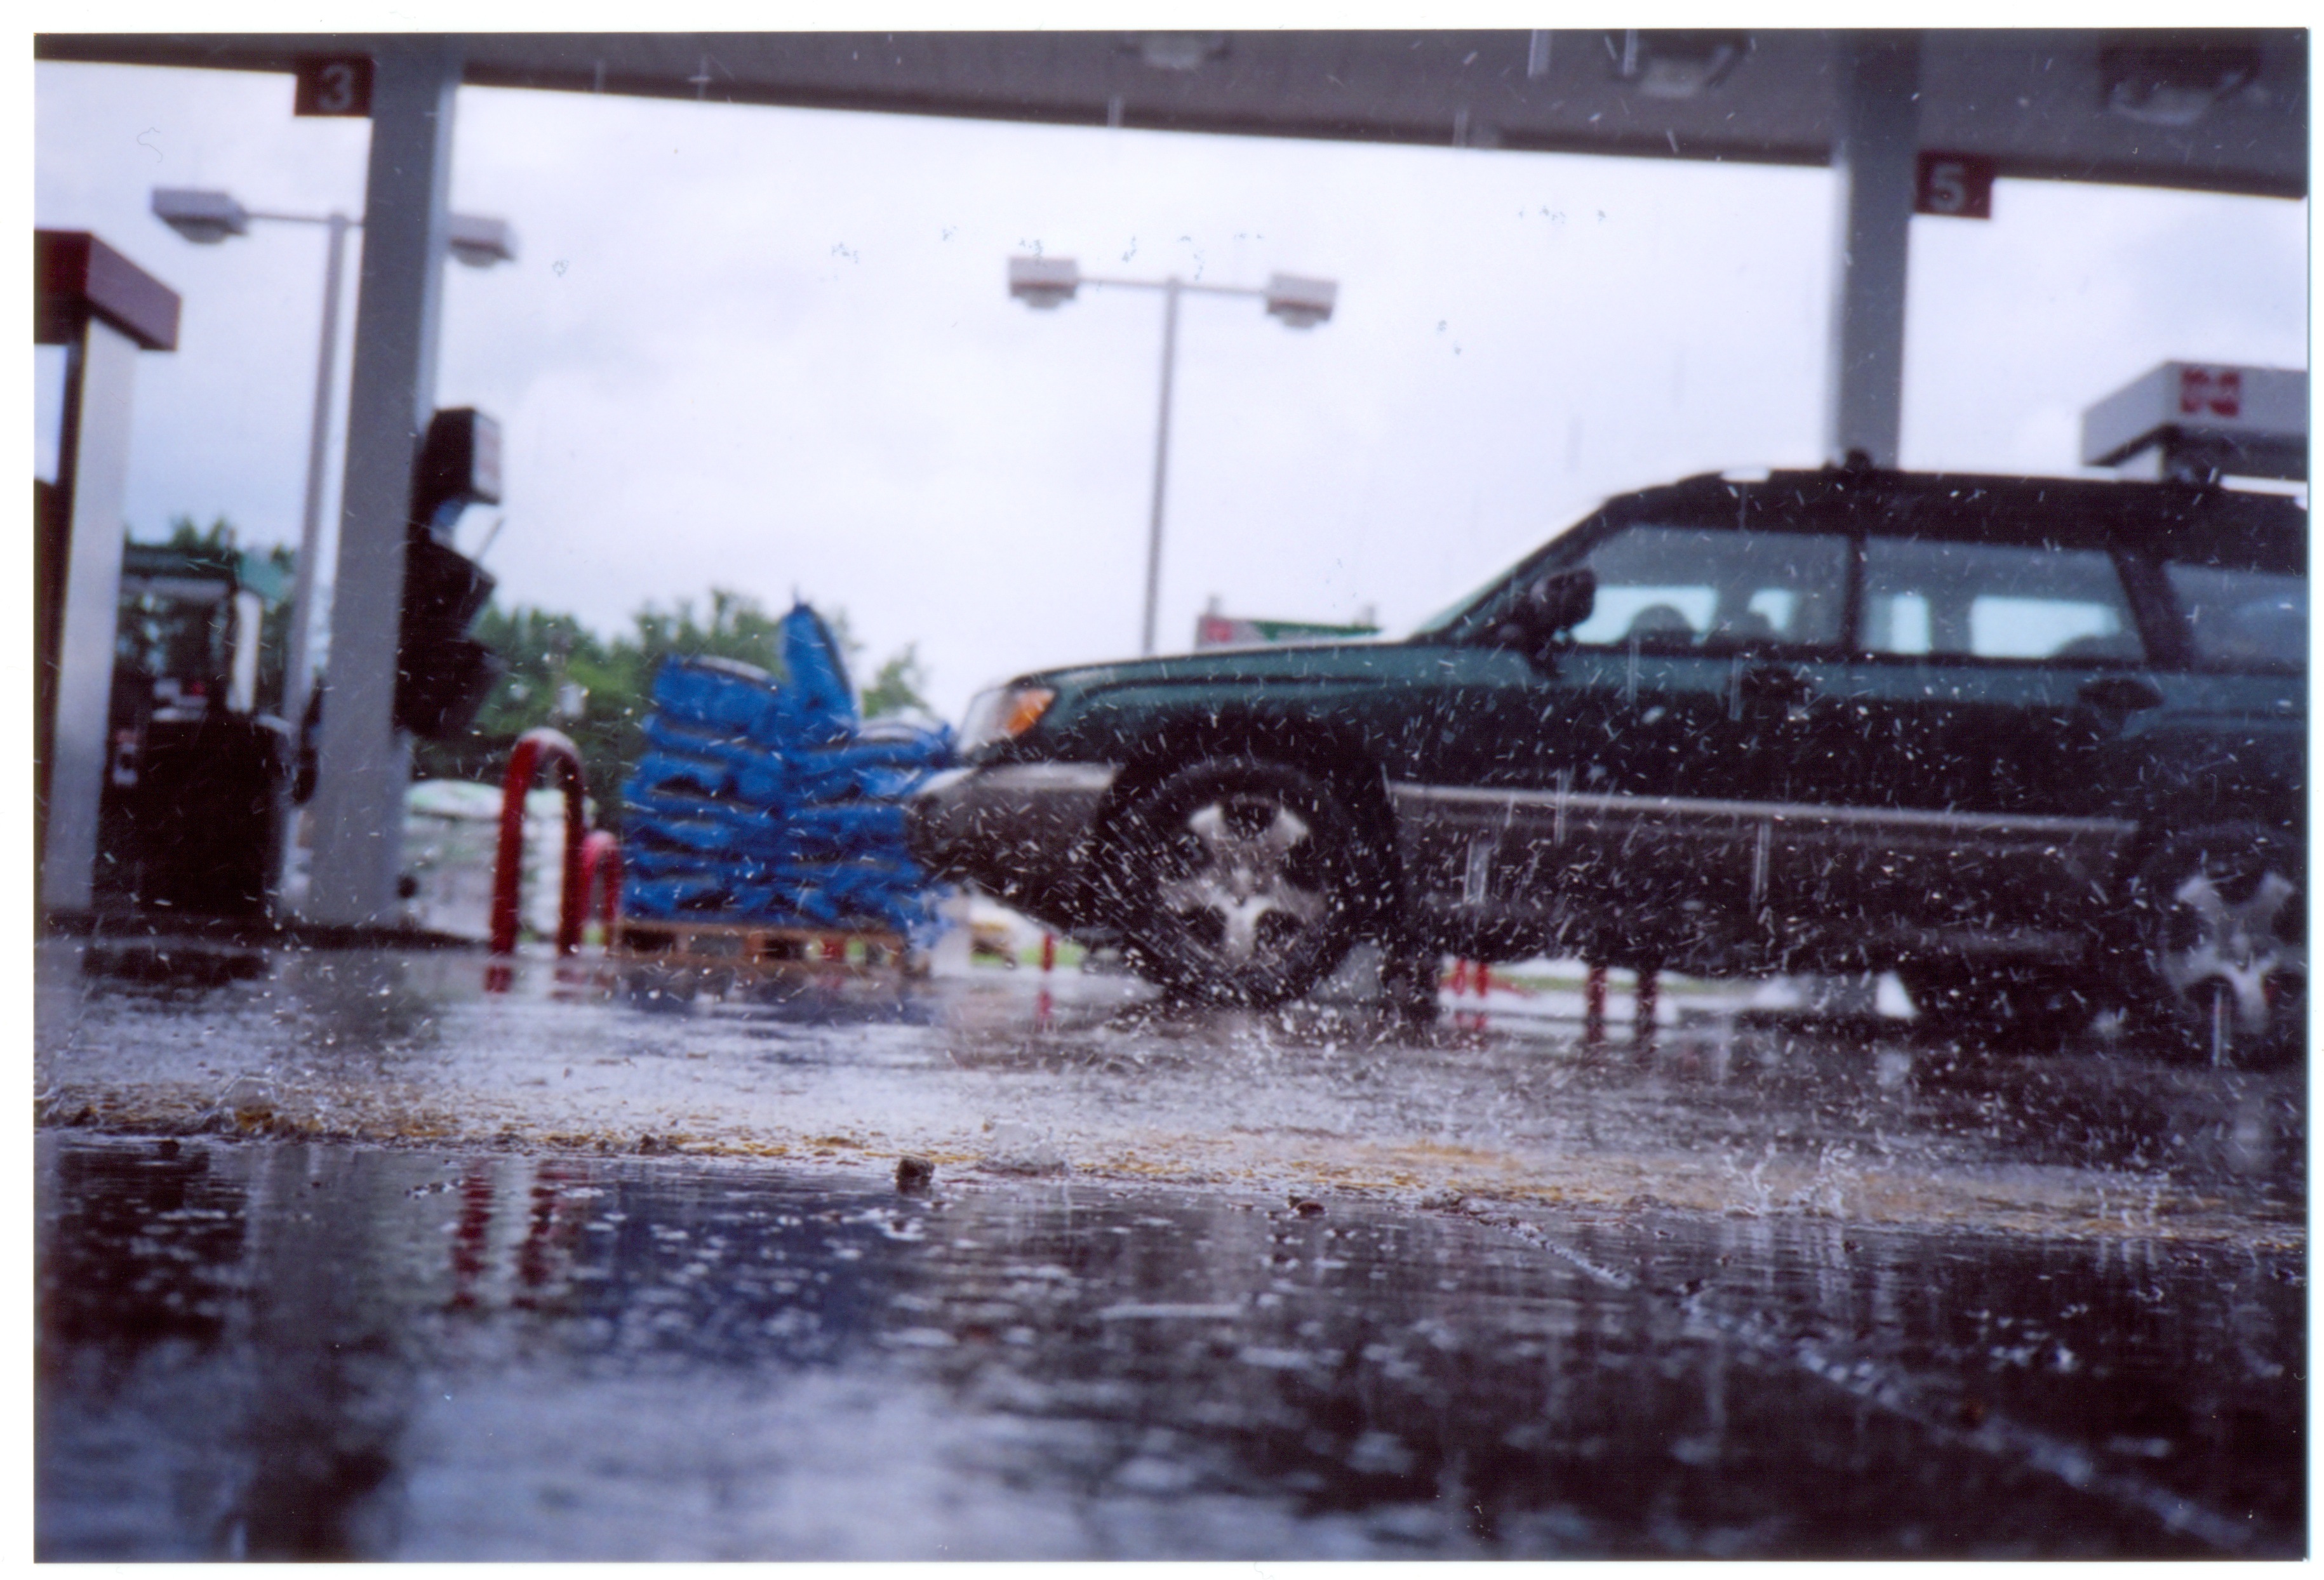 Low angle photograph of raindrops splashing on the pavement at a gas station. My Subaru is in the background of the picture.